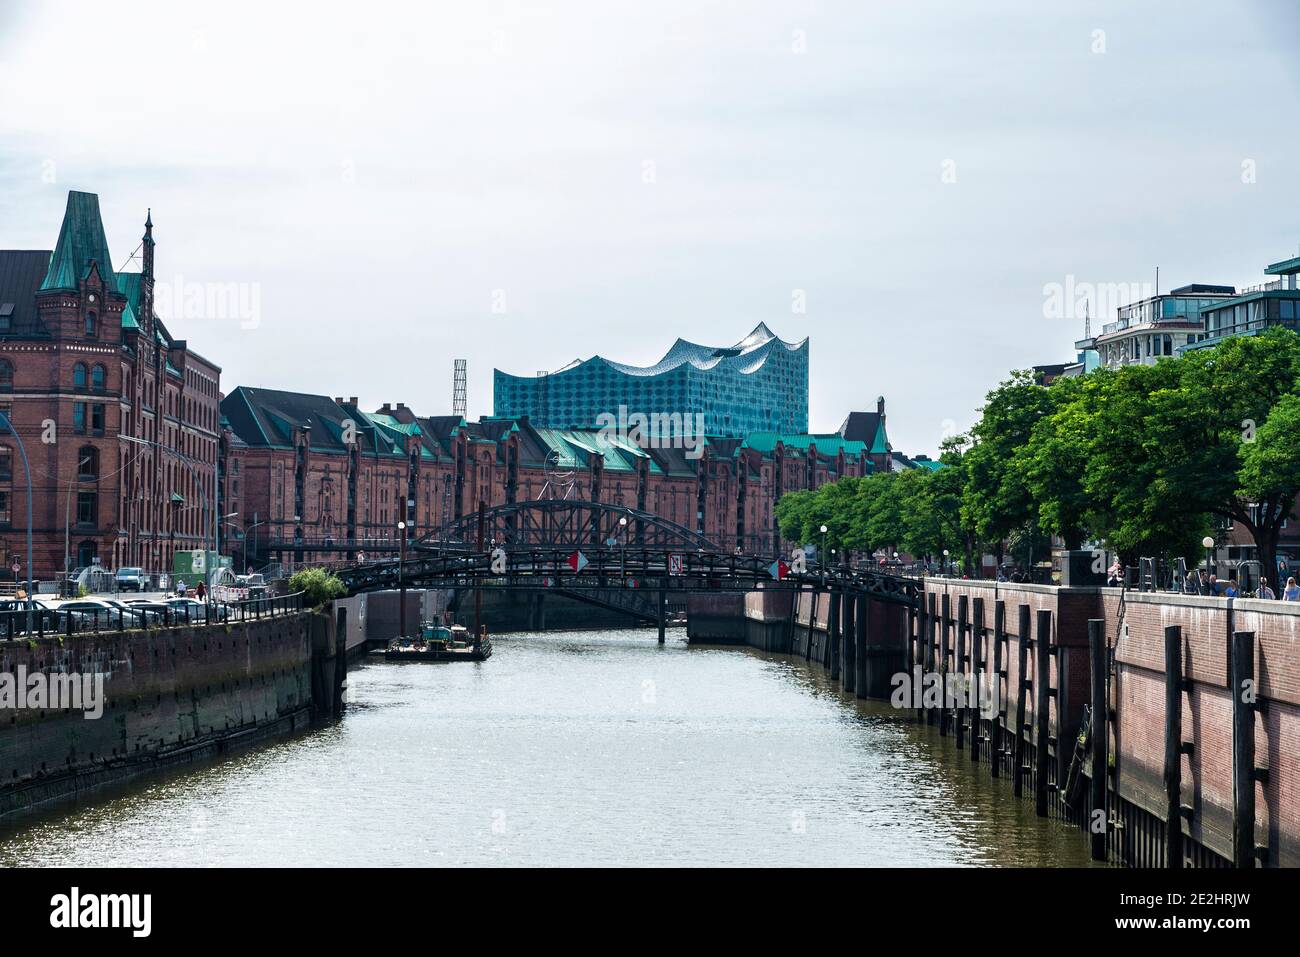 Hamburg, Germany - August 23, 2019: Old warehouses converted into offices and flats next to a canal and the Elbphilharmonie, Elbe Philharmonic Hall, w Stock Photo